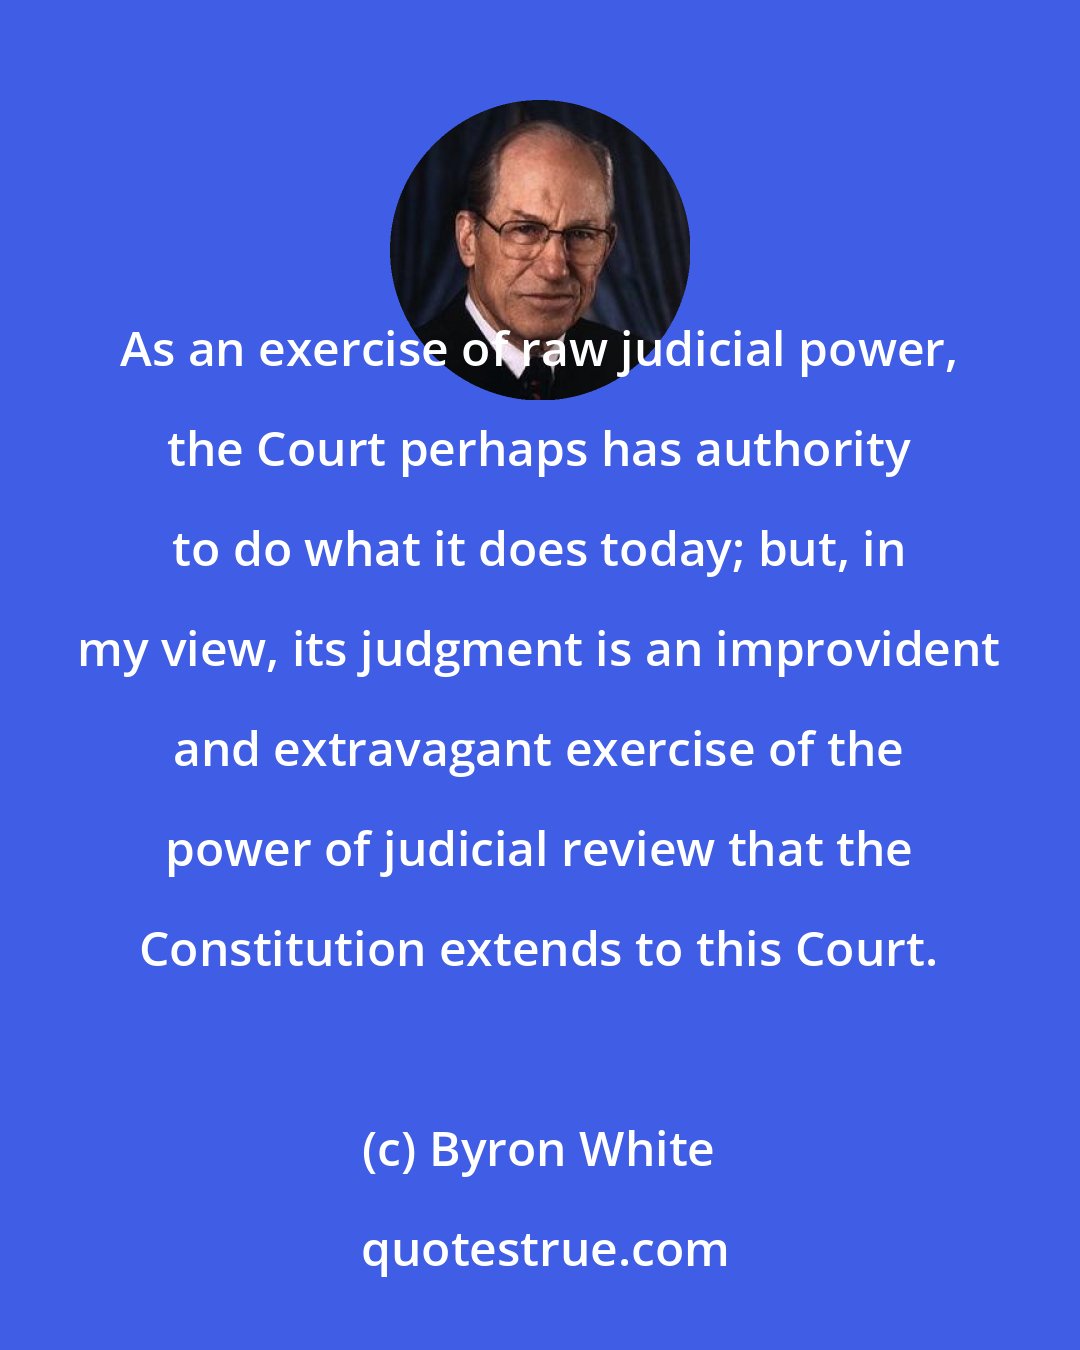 Byron White: As an exercise of raw judicial power, the Court perhaps has authority to do what it does today; but, in my view, its judgment is an improvident and extravagant exercise of the power of judicial review that the Constitution extends to this Court.